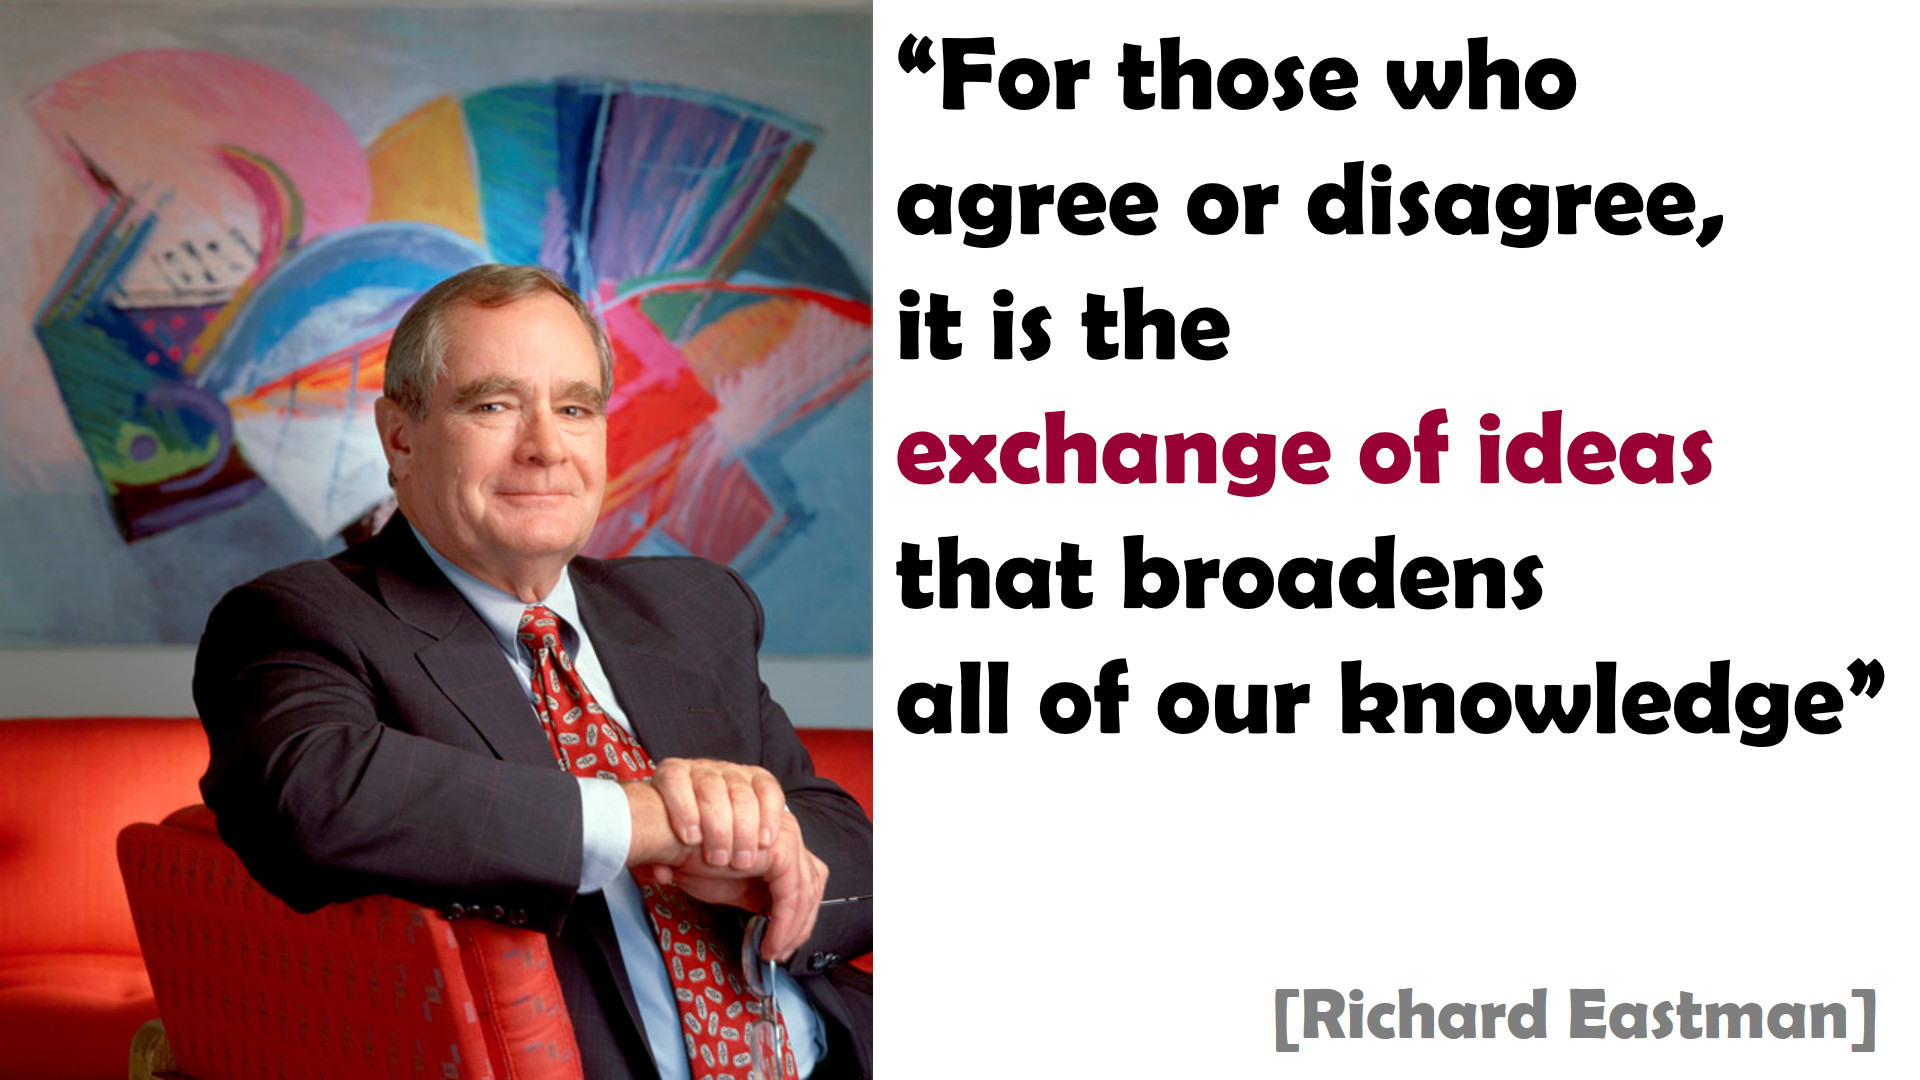 “For those who agree or disagree, it is the exchange of ideas that broadens all of our knowledge” [Richard Eastman]